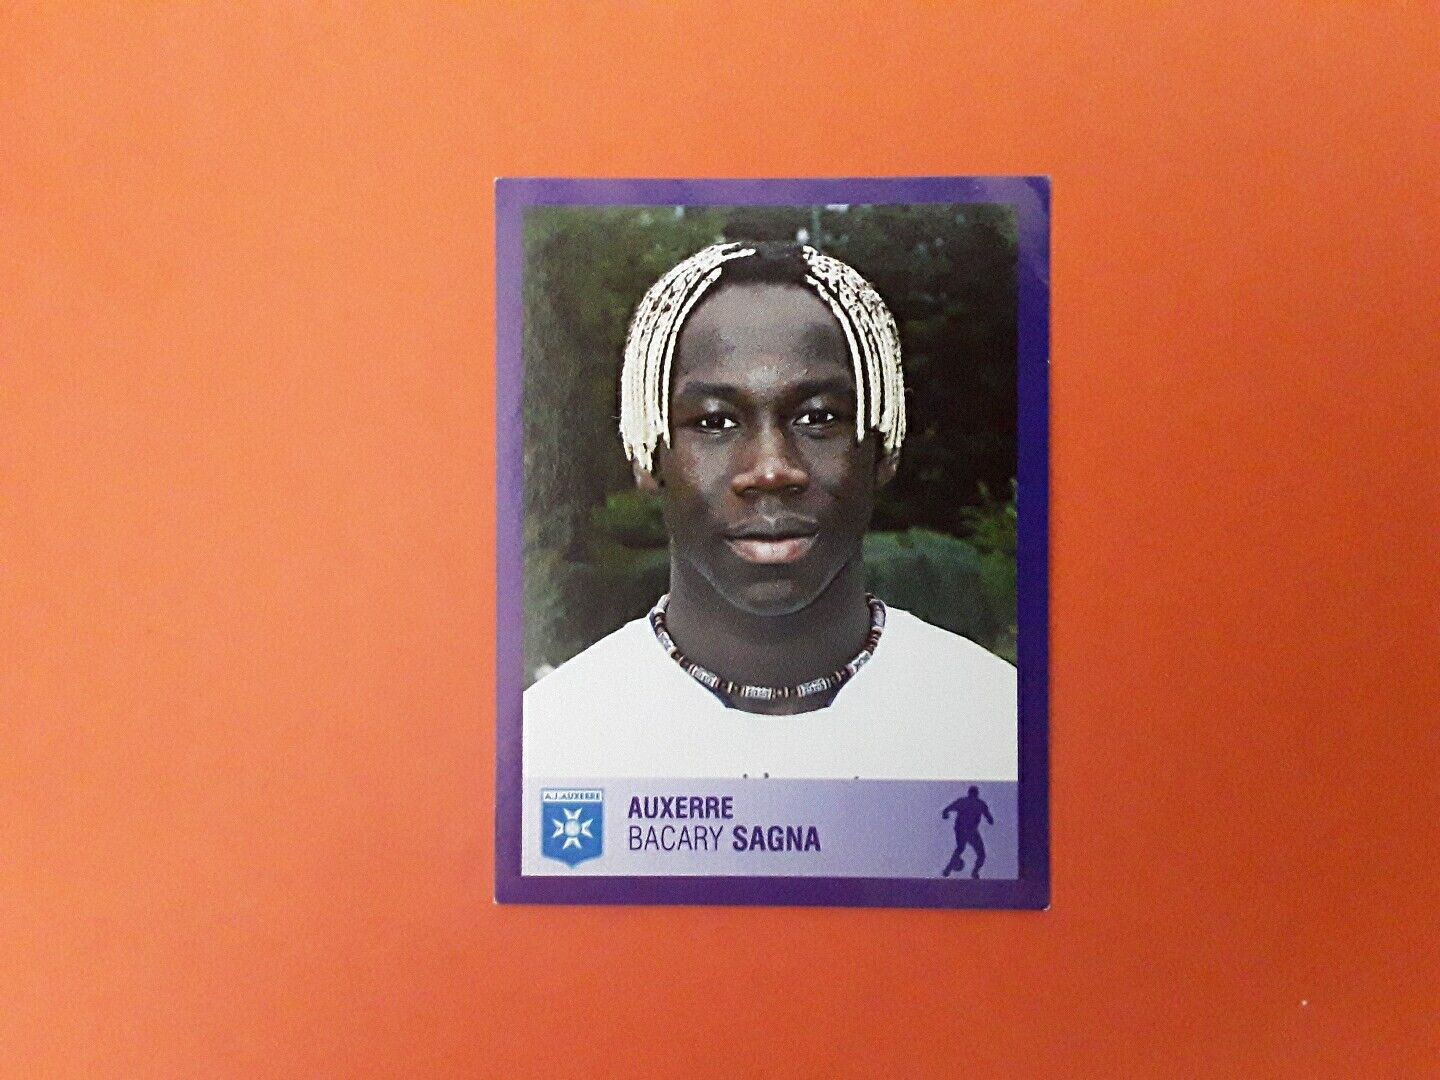 2006 Panini FOOTBALL ROOKIE BACARY SAGNA AUXERRE ARSENAL #58